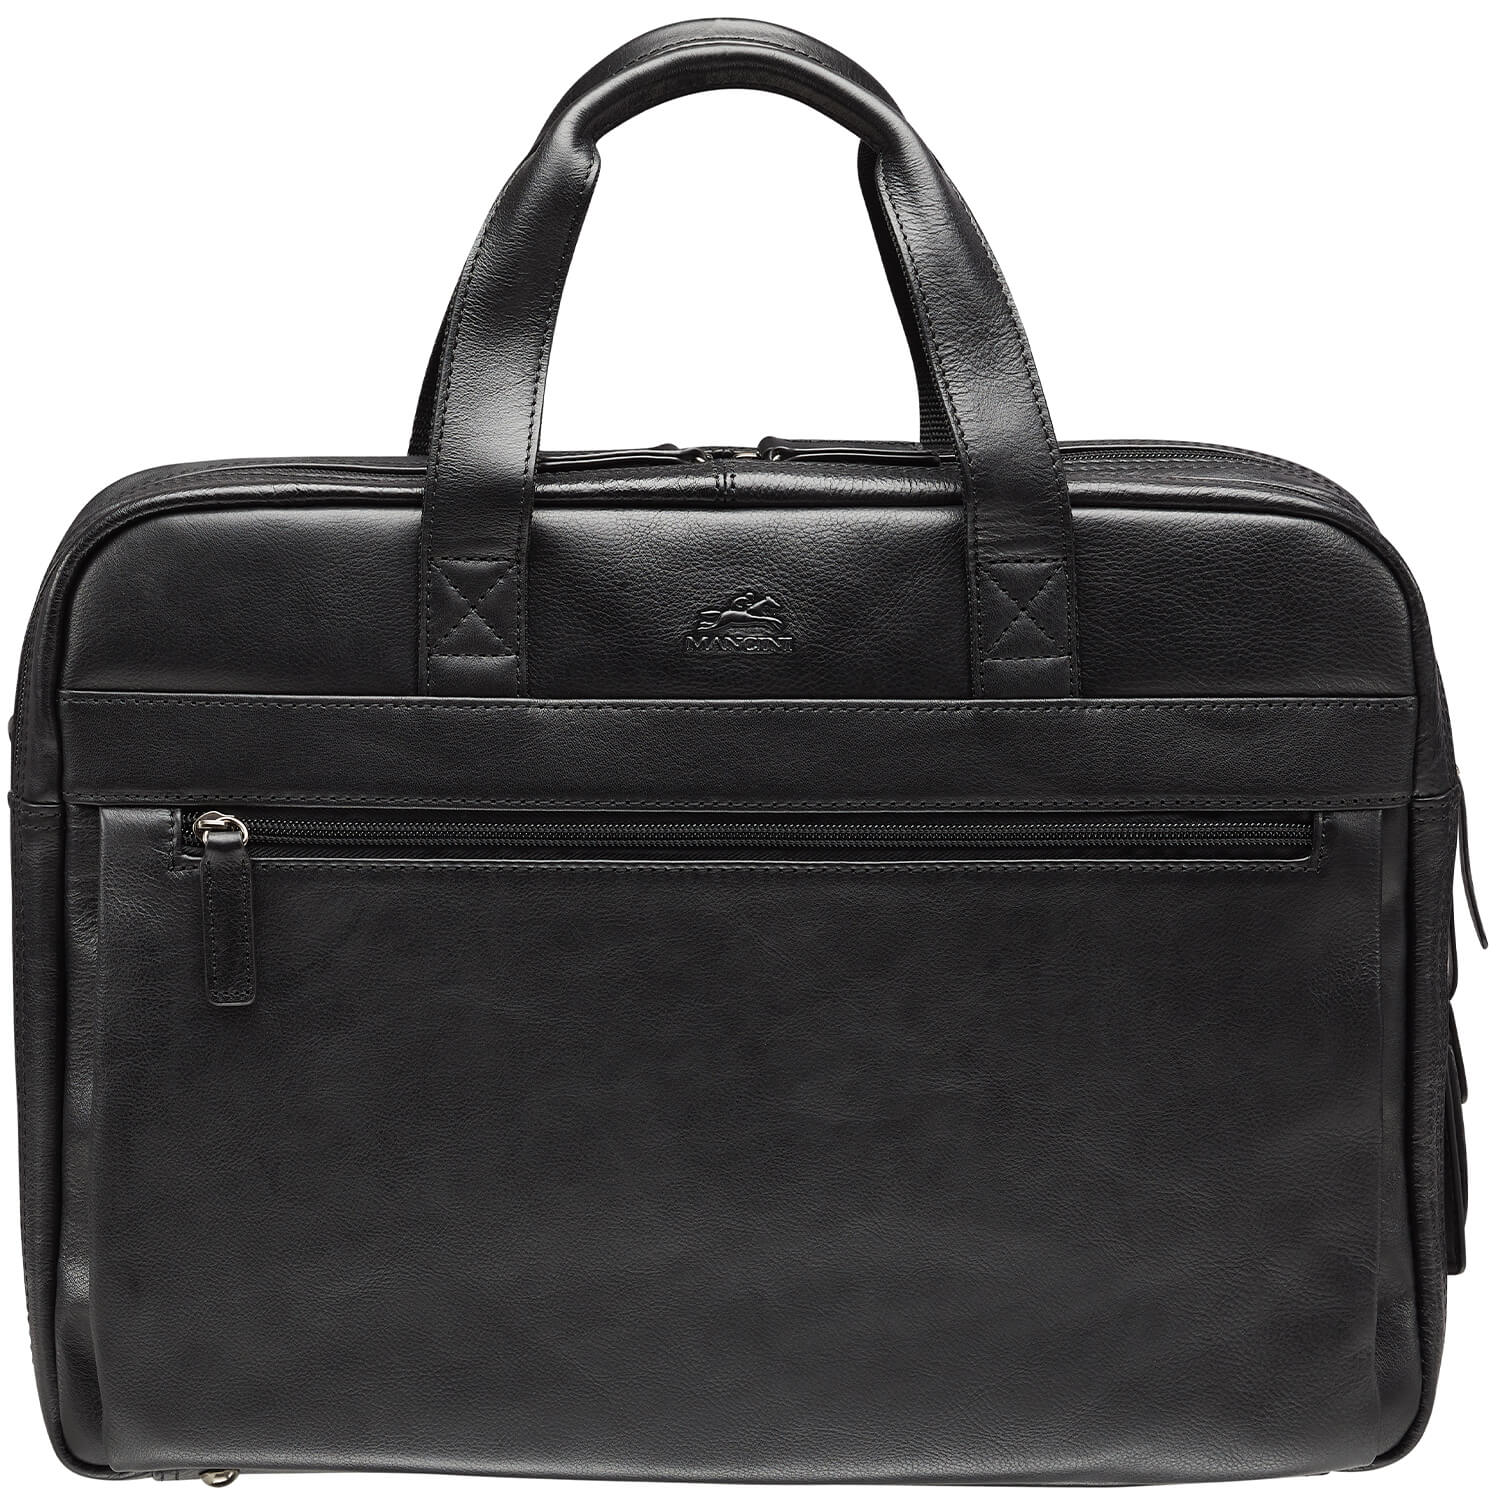 Double Compartment Briefcase with RFID Secure Pocket for 15.6” Laptop / Tablet